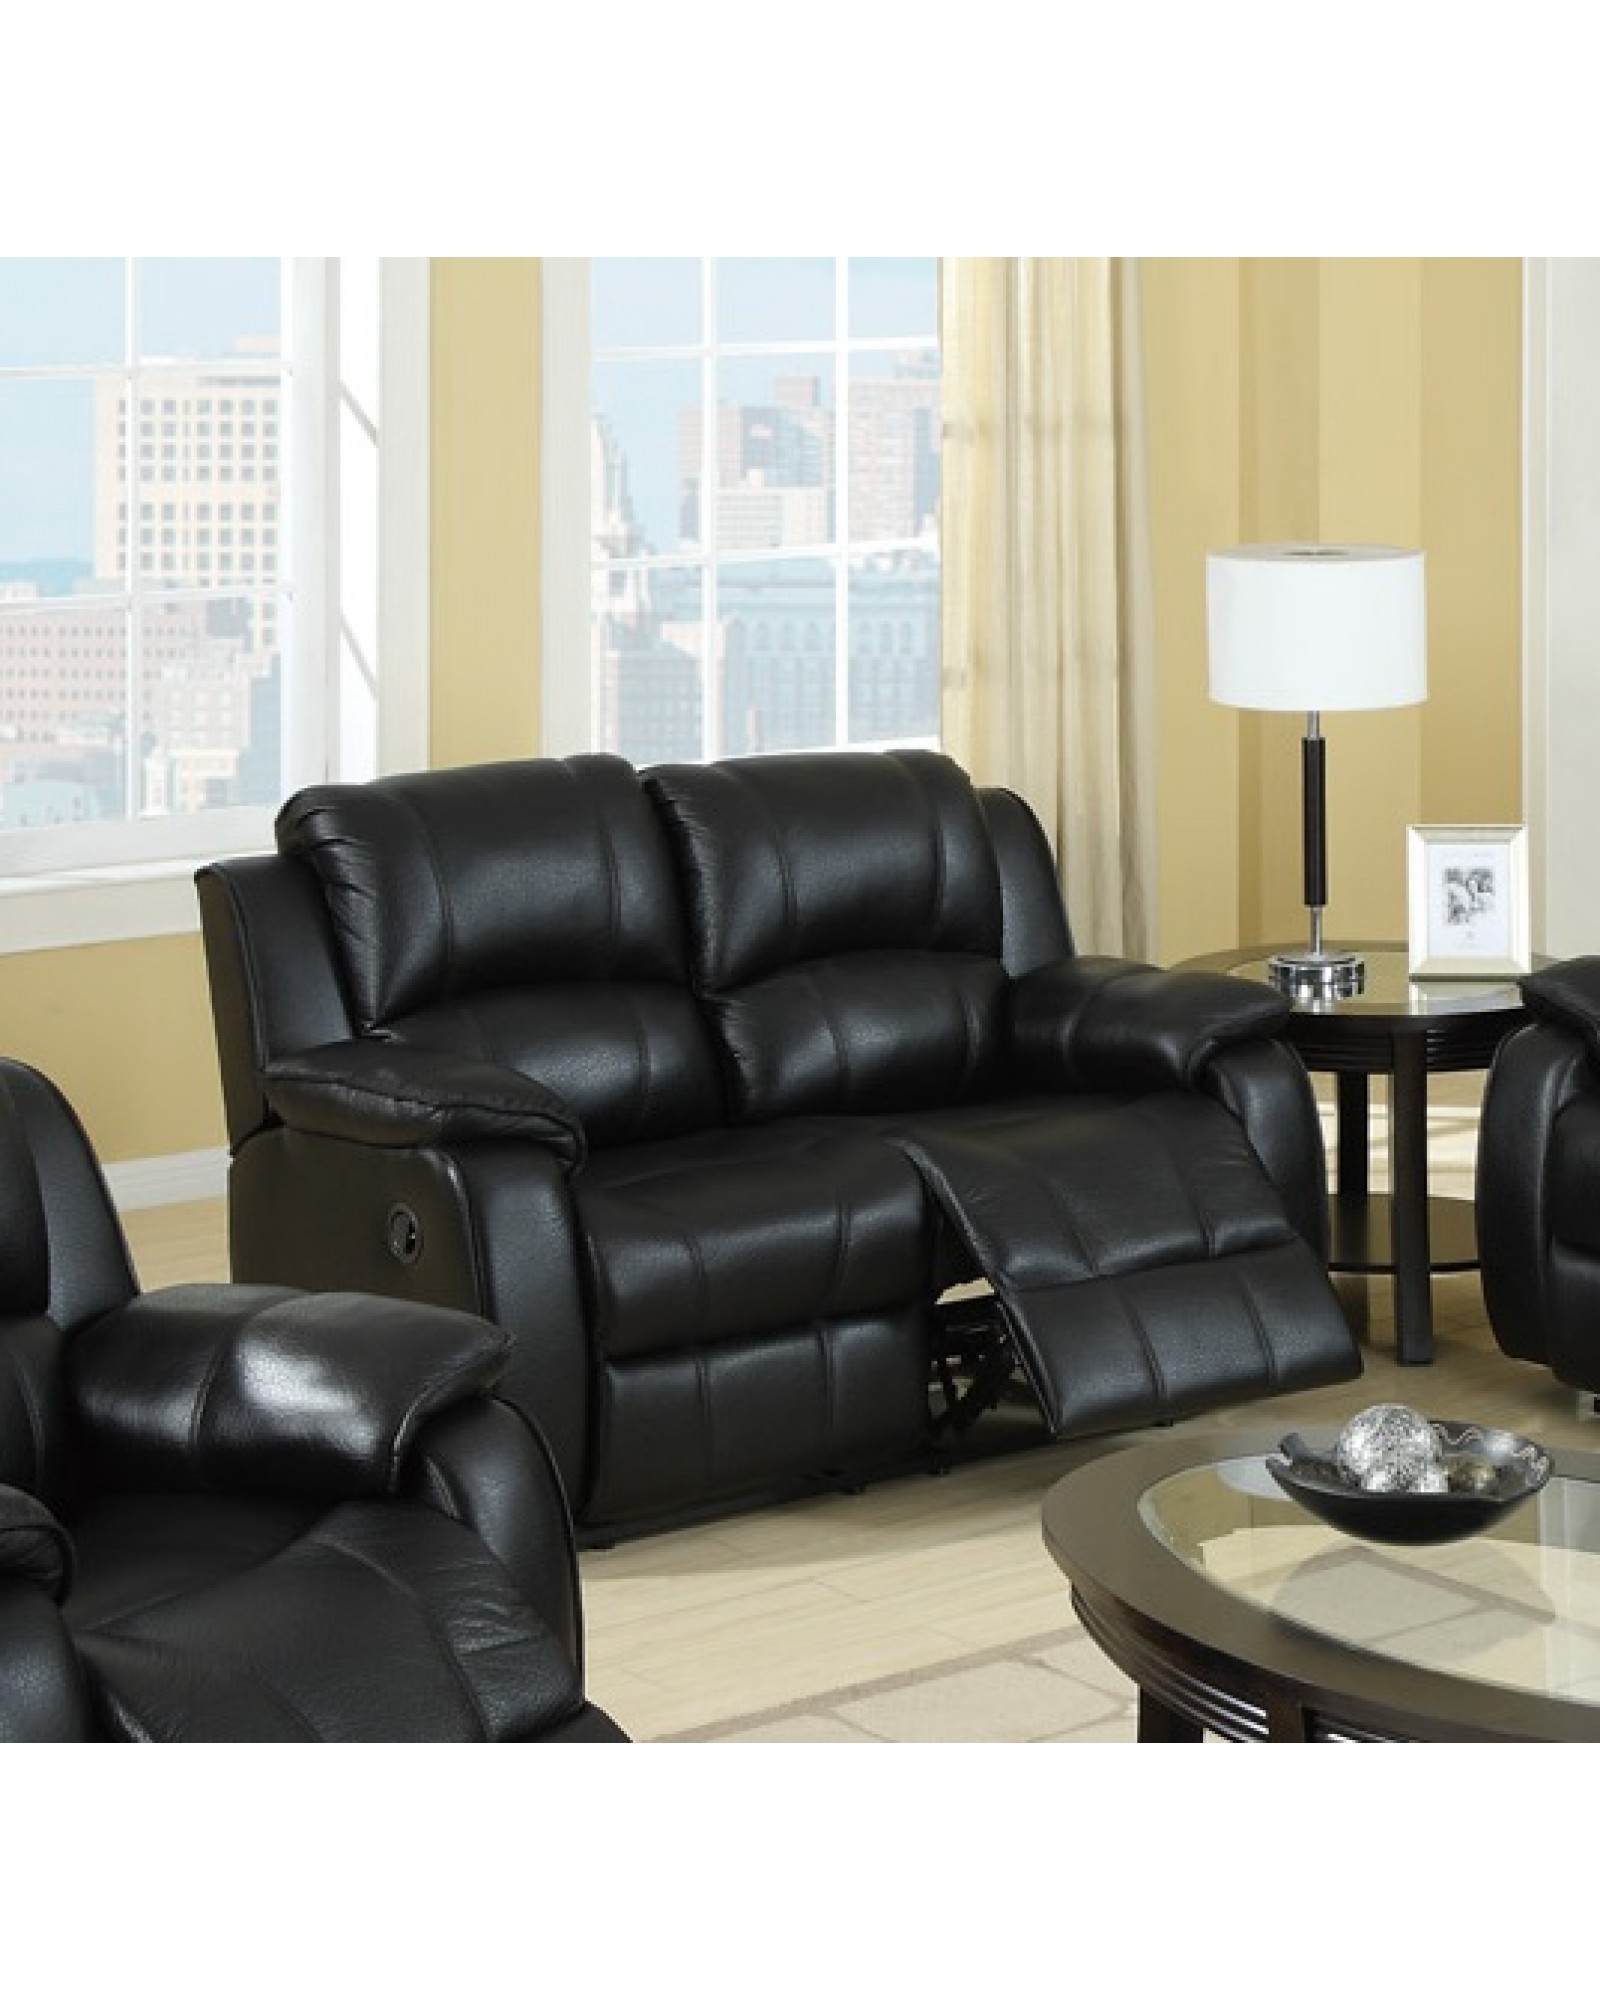 Padded Leatherette Motion Sofa, Loveseat and Recliner, Black